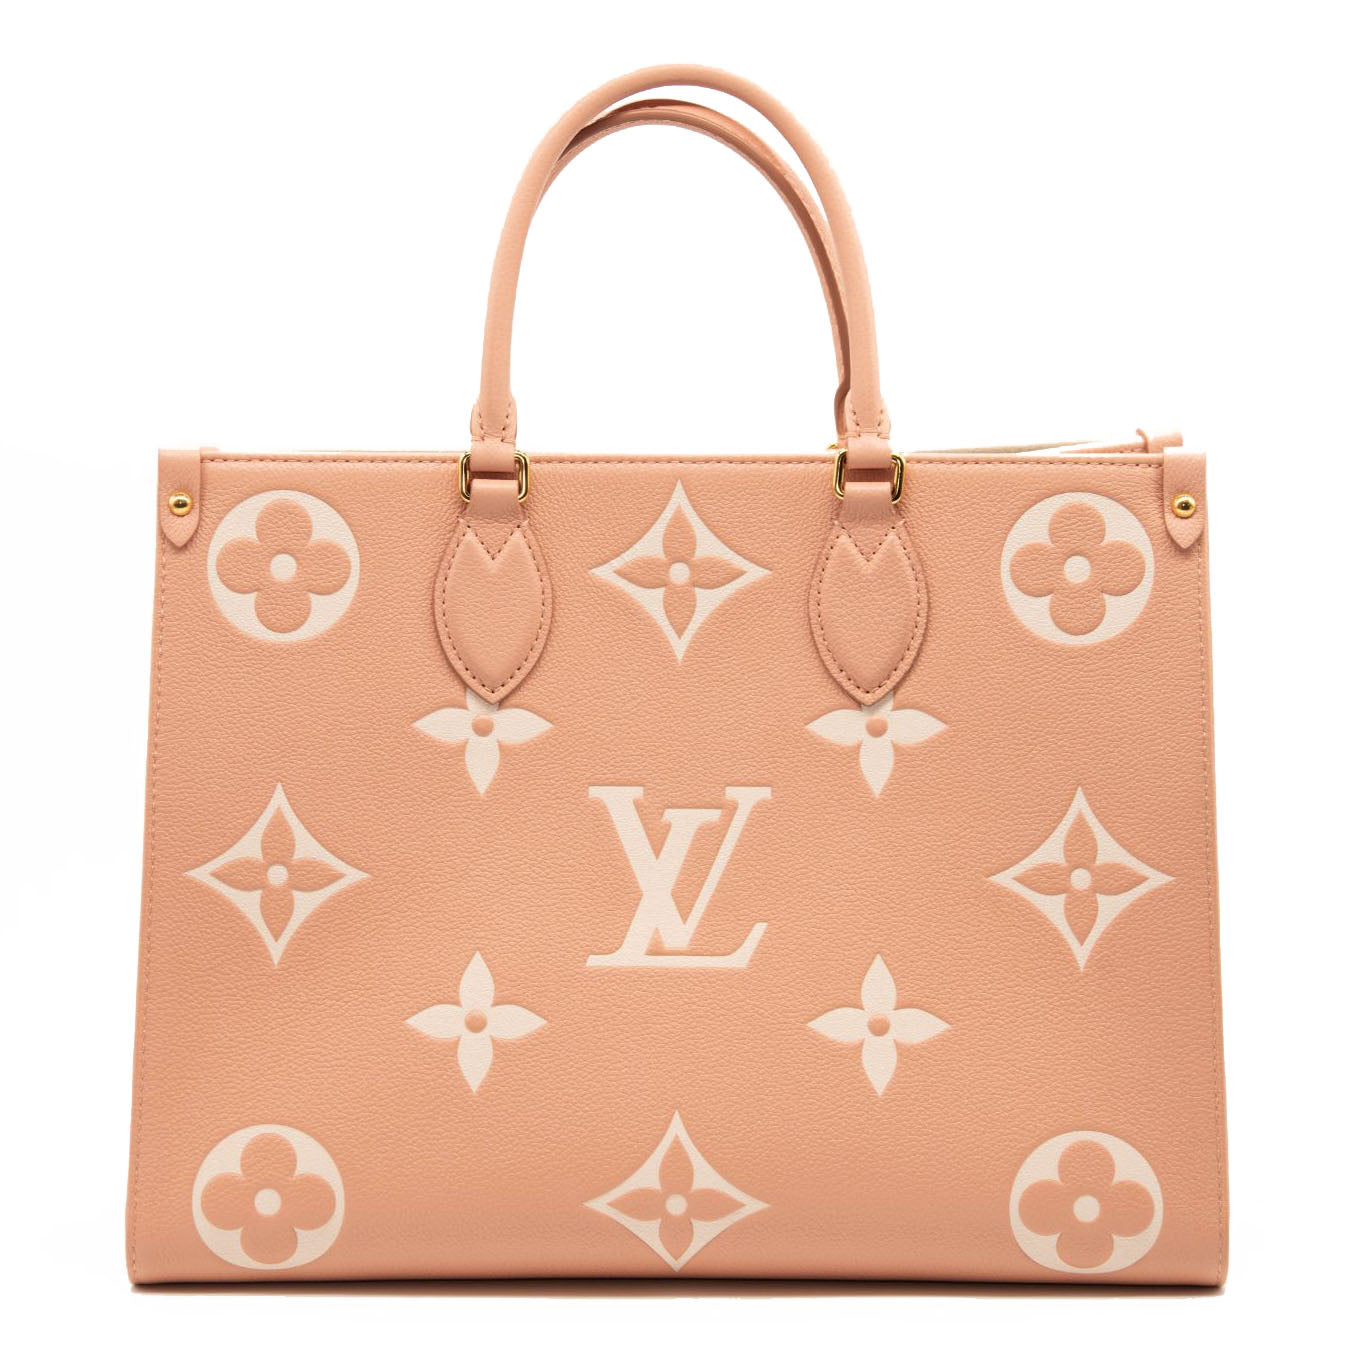 LOUIS VUITTON WILD AT HEART NEVERFULL MM CREME GIANT MONOGRAM BAG LIMITED  ED.